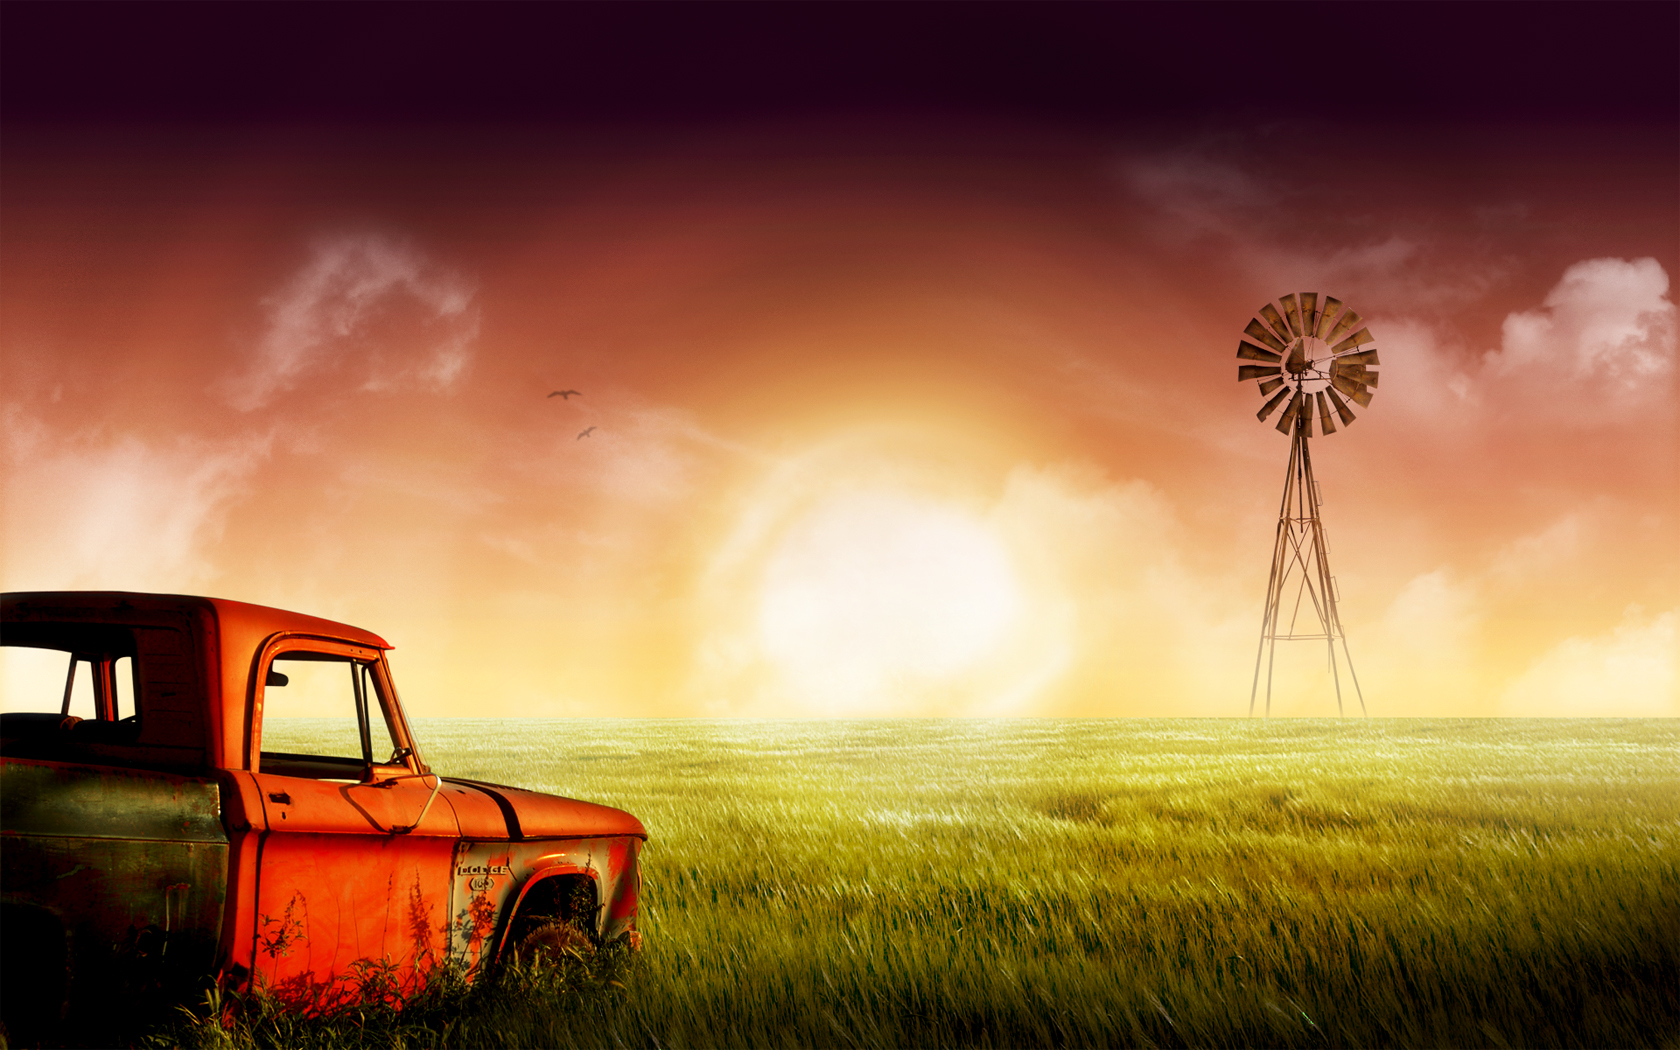 Free Download Creative Hd Windmill Lawn Car Old Creative Wallpaper Full Hd 1680x1050 For Your Desktop Mobile Tablet Explore 49 Creative Hd Wallpapers Computer Graphic Hd Wallpaper 1920x1080 Creative